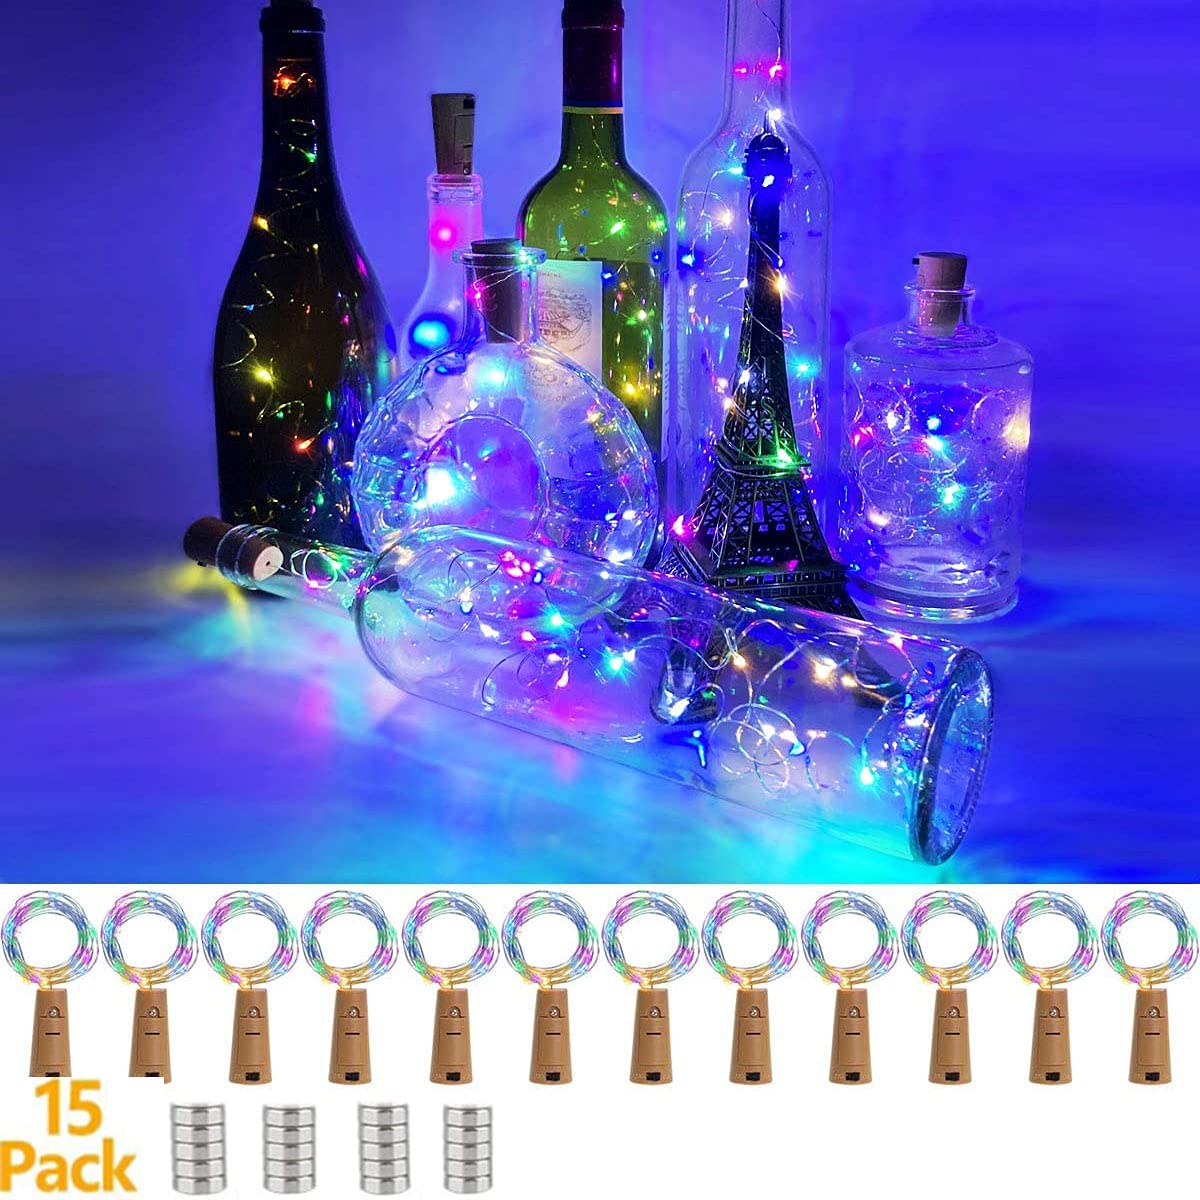 Pack of 15 LED Bottle Lights, 20 LEDs, 2 m Fairy Lights, Copper Wire, Battery Operated Wine Bottle Lights with Cork String Light for DIY Party Wedding Mood Lights (Colour Light)